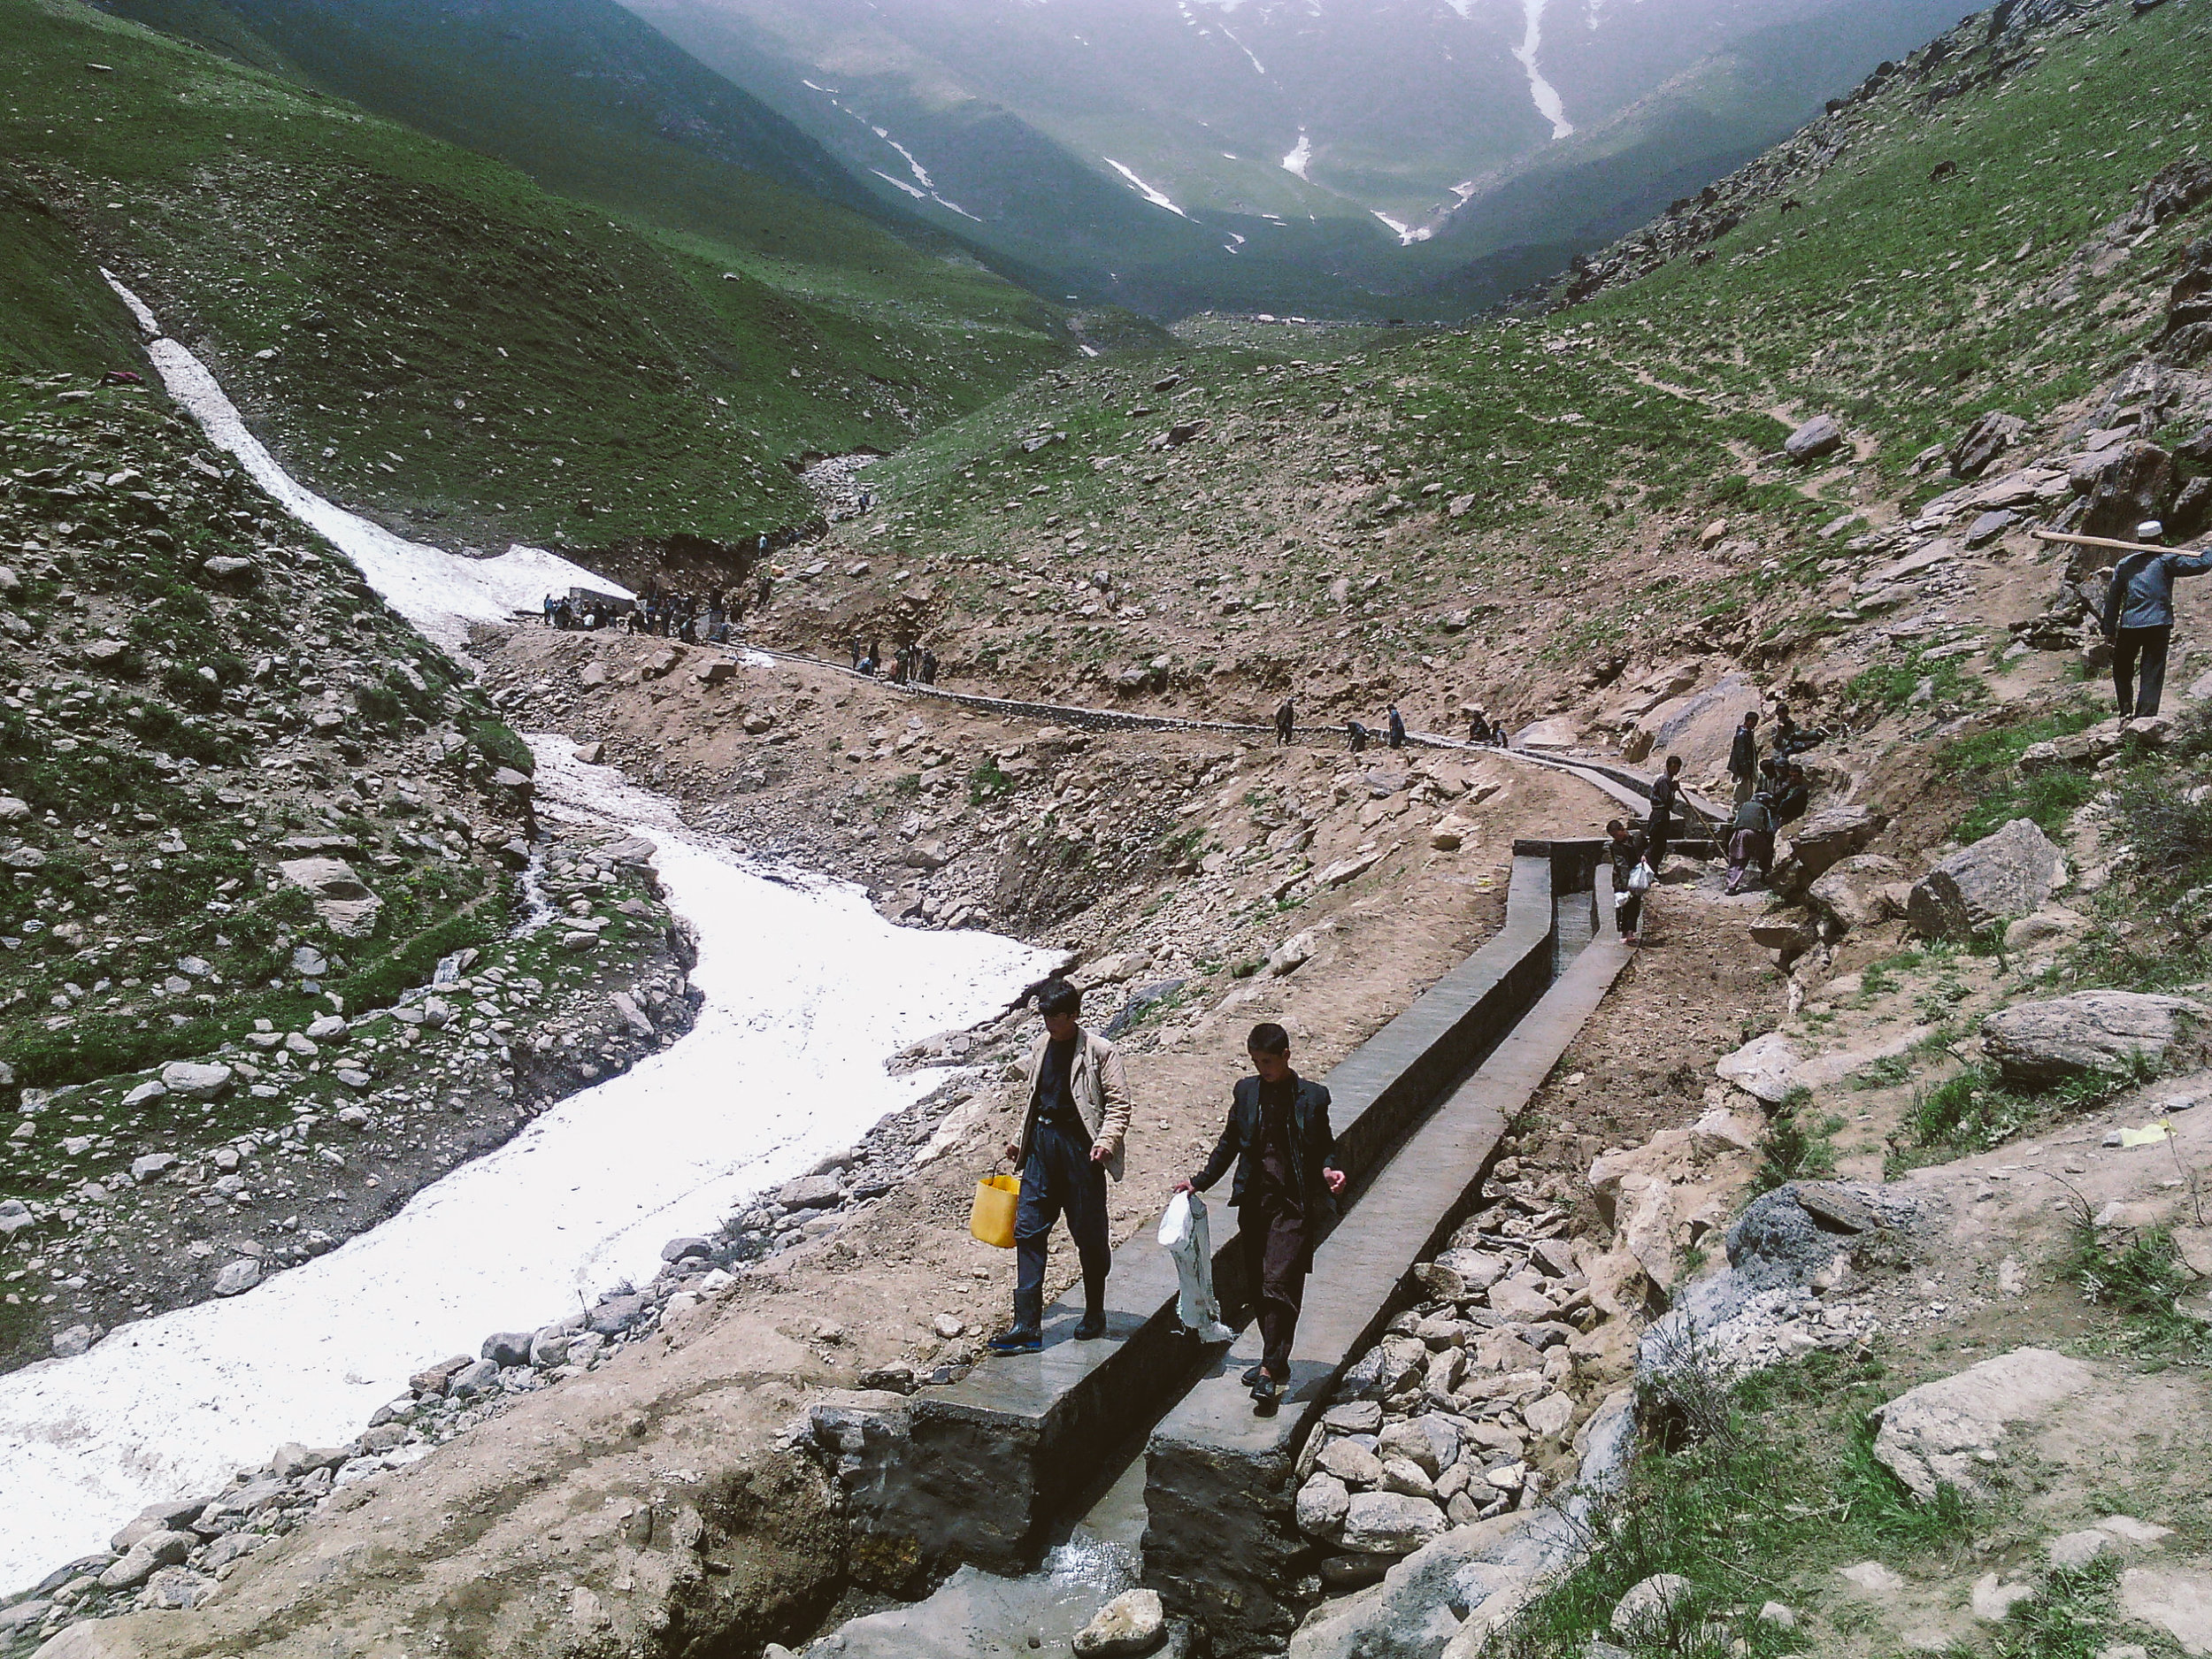  Construction of irrigation canals that will channel water to farmers for irrigation 